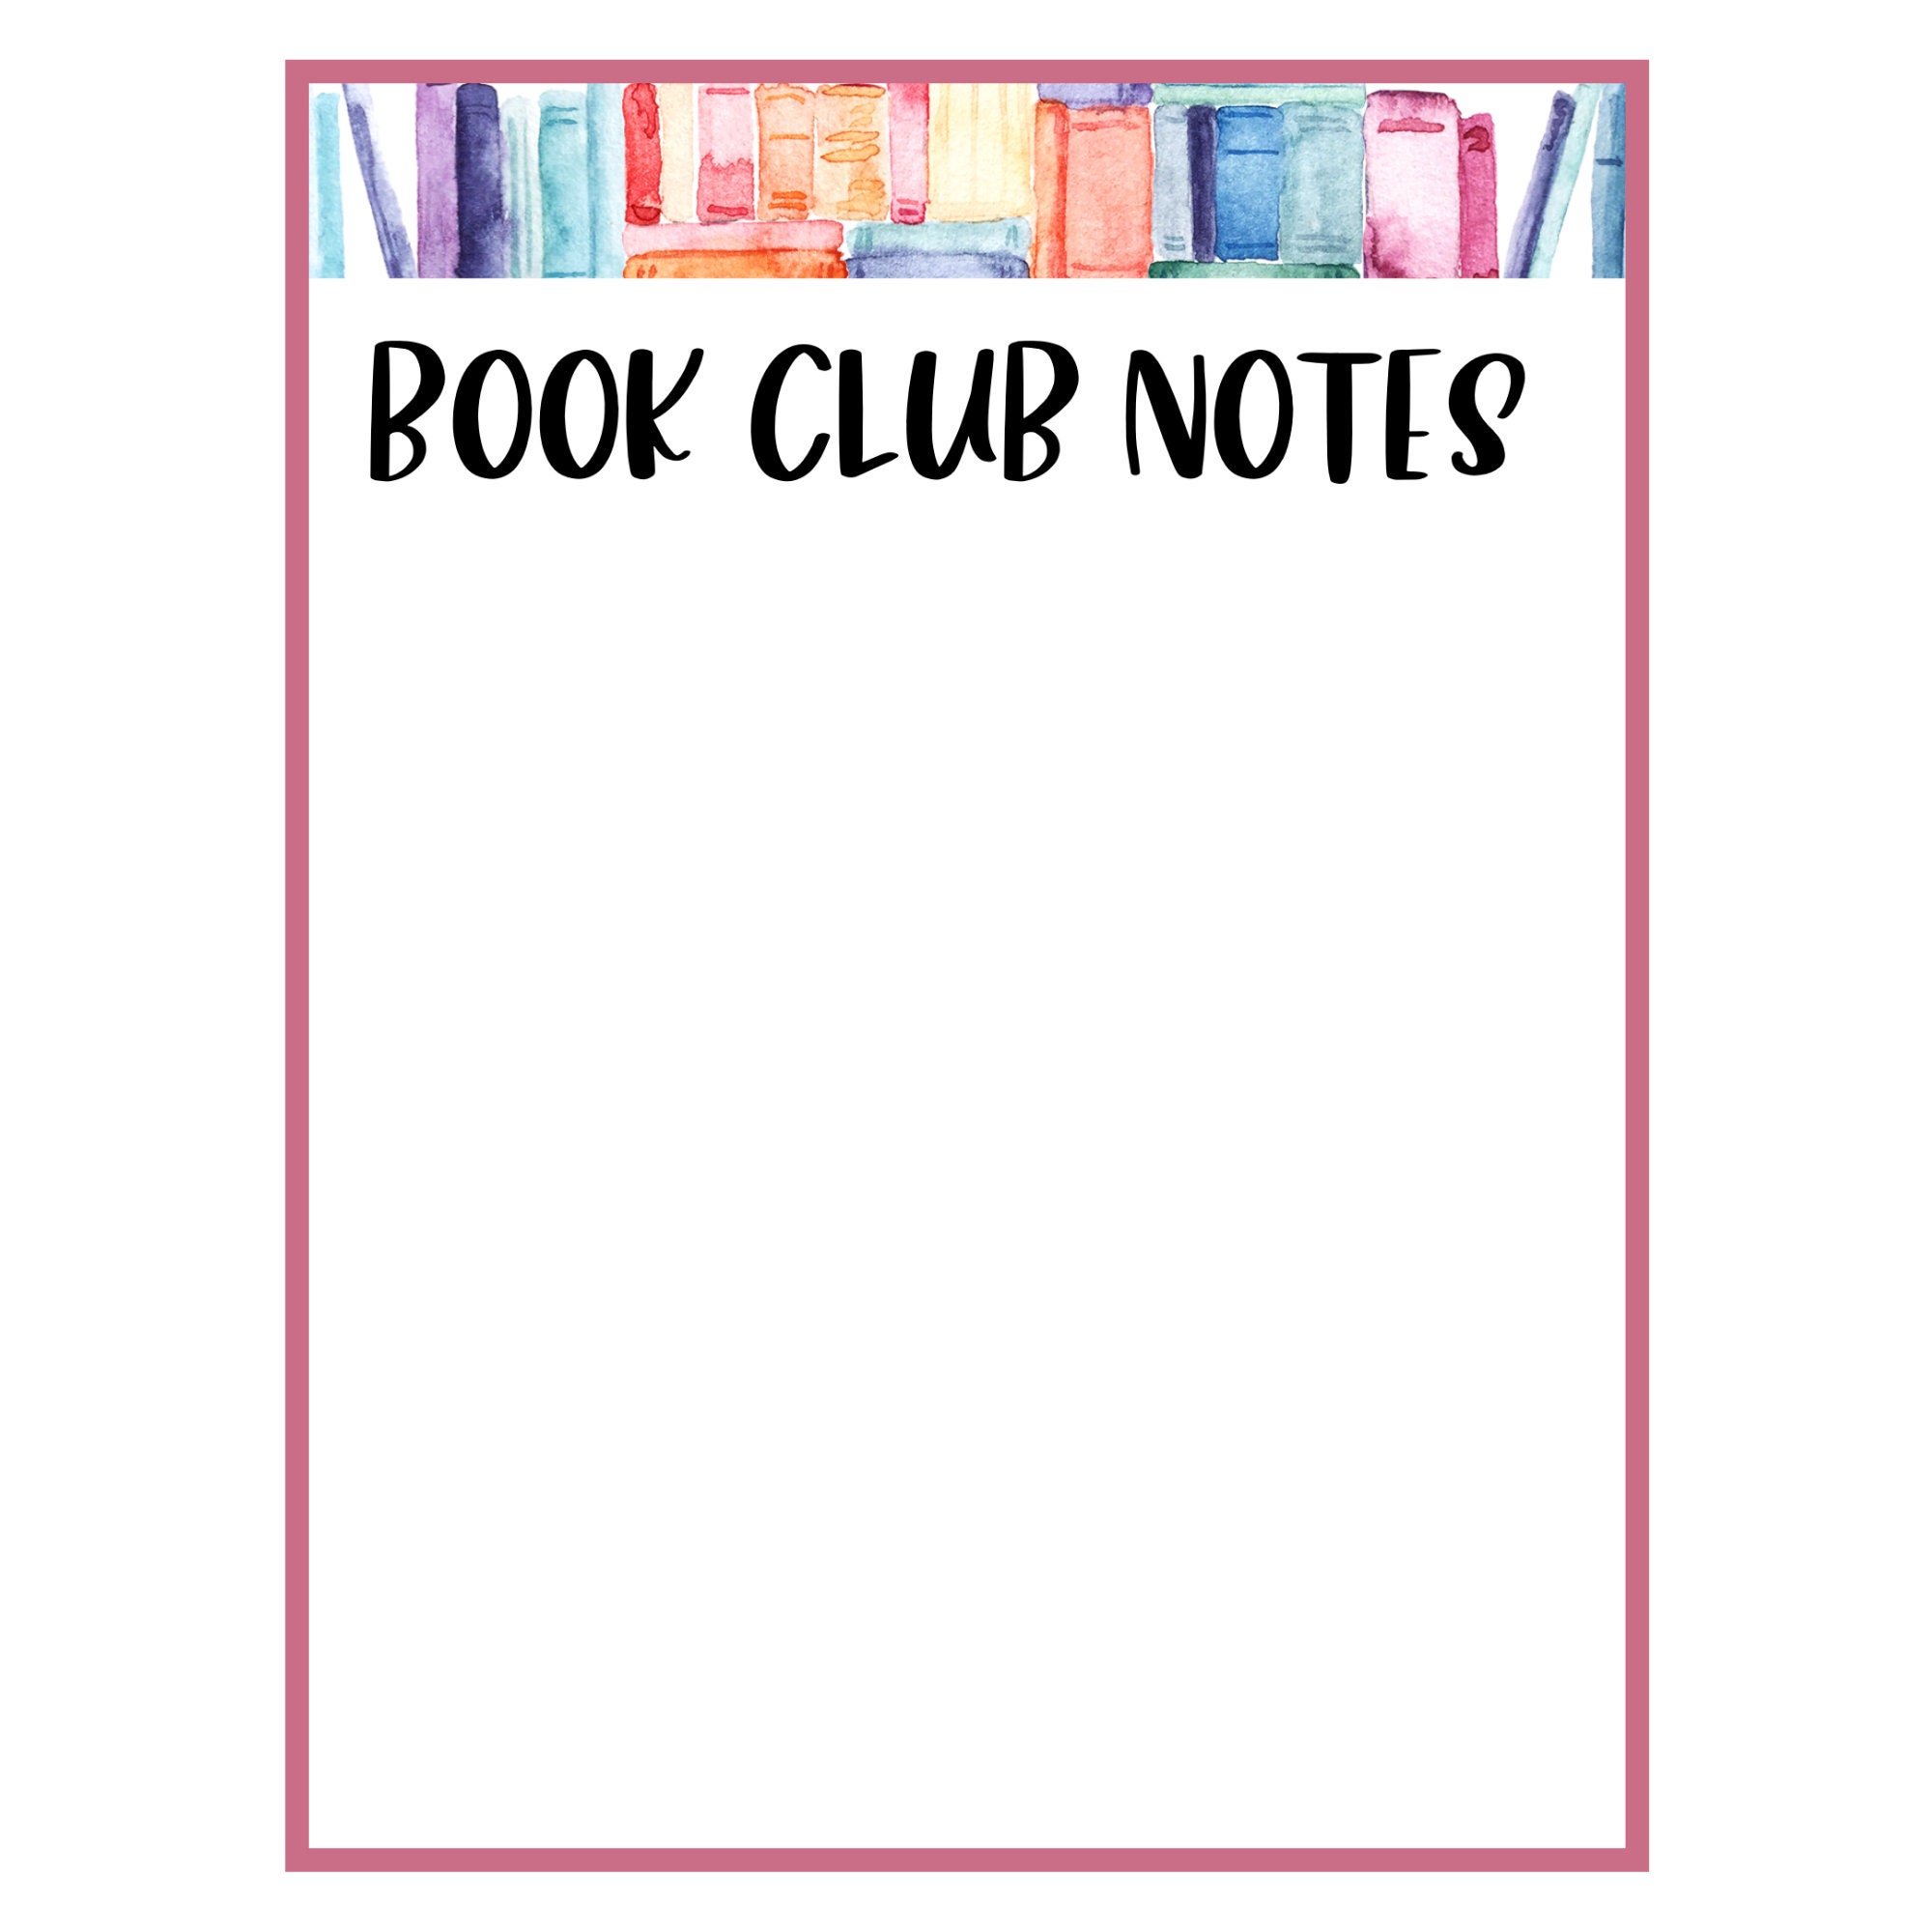 book-club-notes-paper-book-stacks-writing-reading-etsy